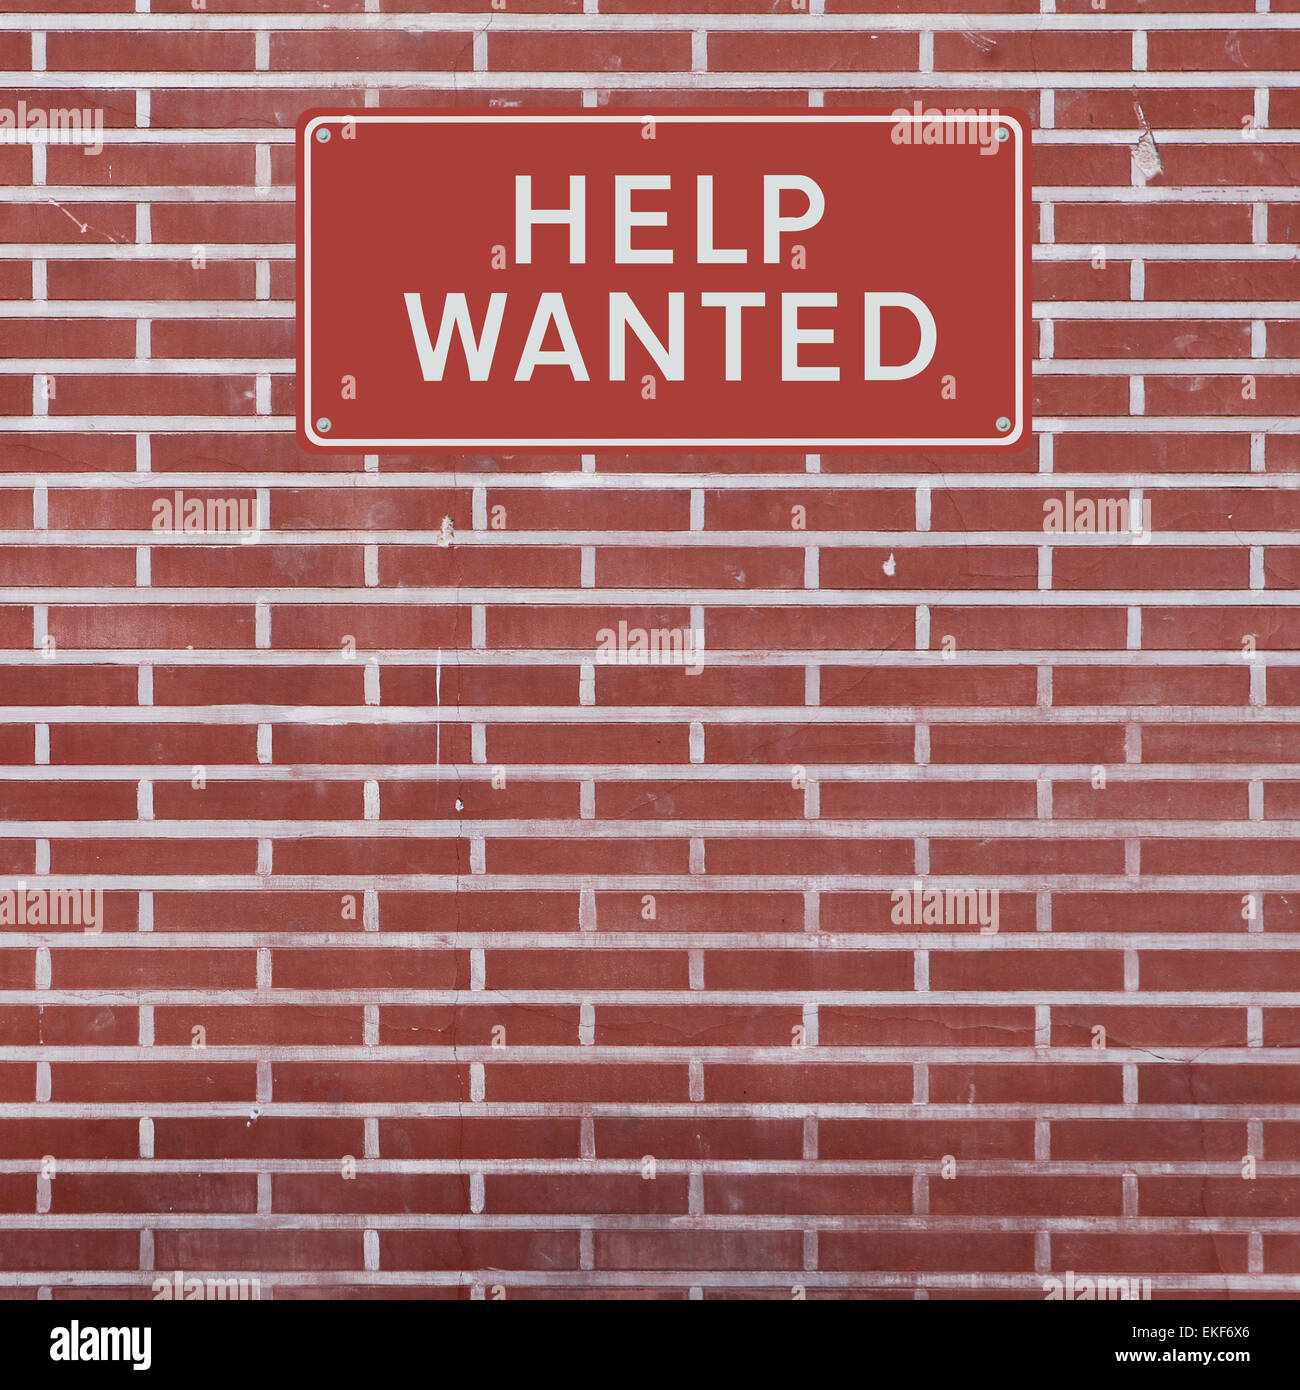 Help Wanted Stock Photo